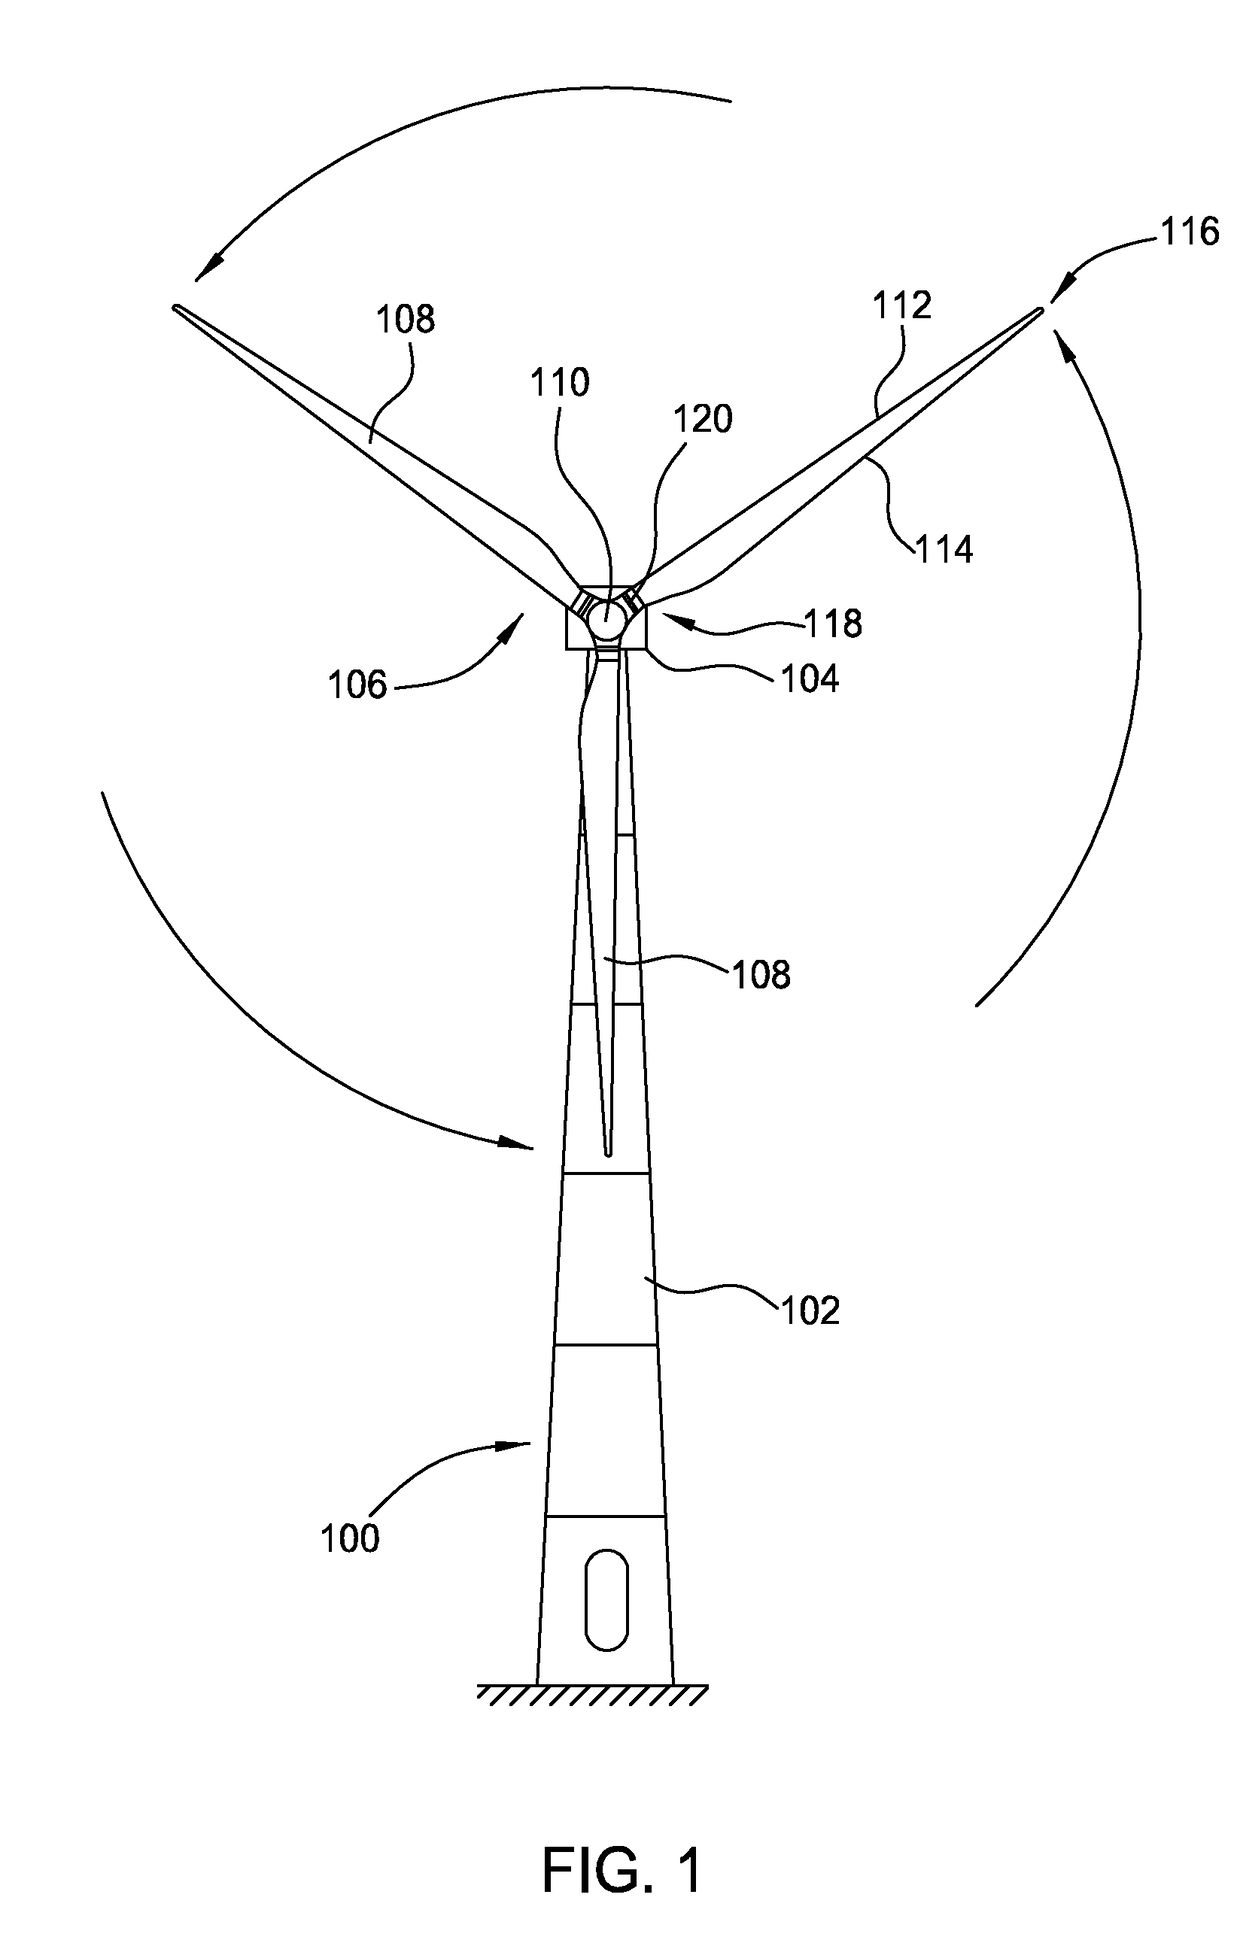 Method for improving large array wind park power performance through active wake manipulation reducing shadow effects